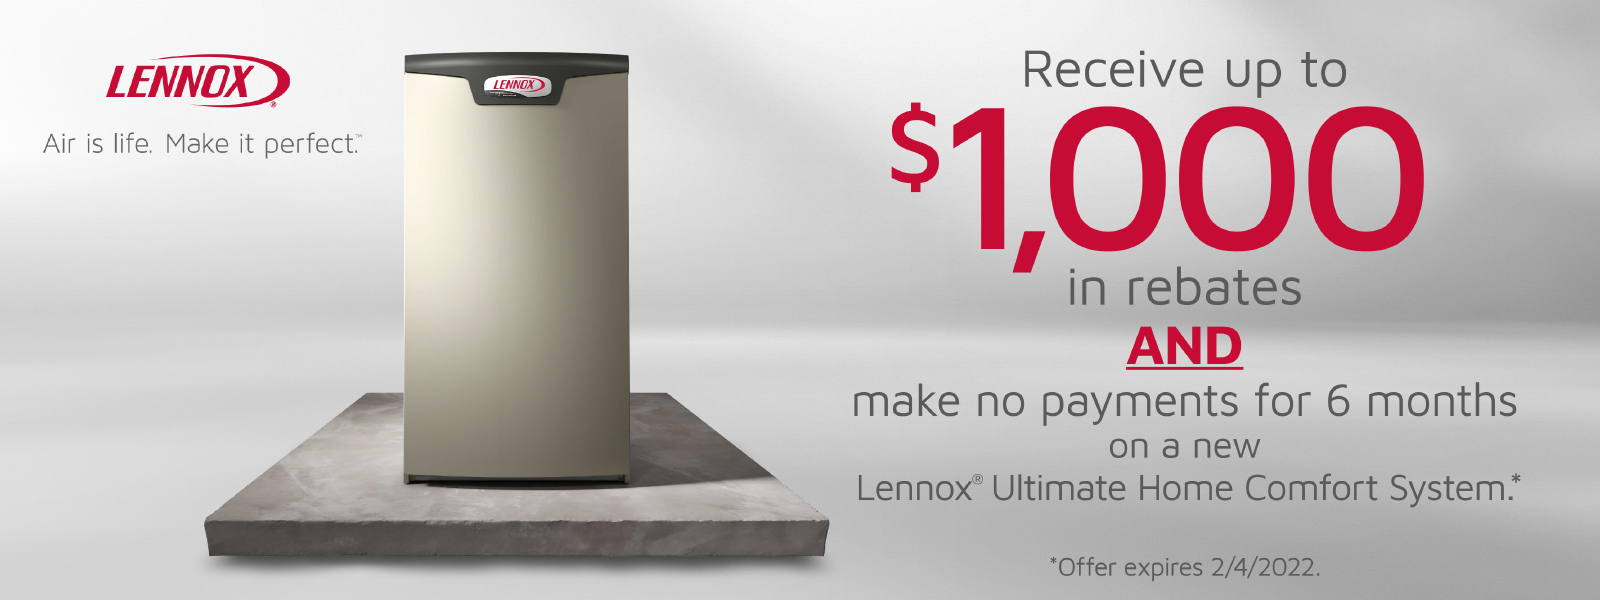 furnace-air-conditioner-rebates-promotions-ontario-climate-experts